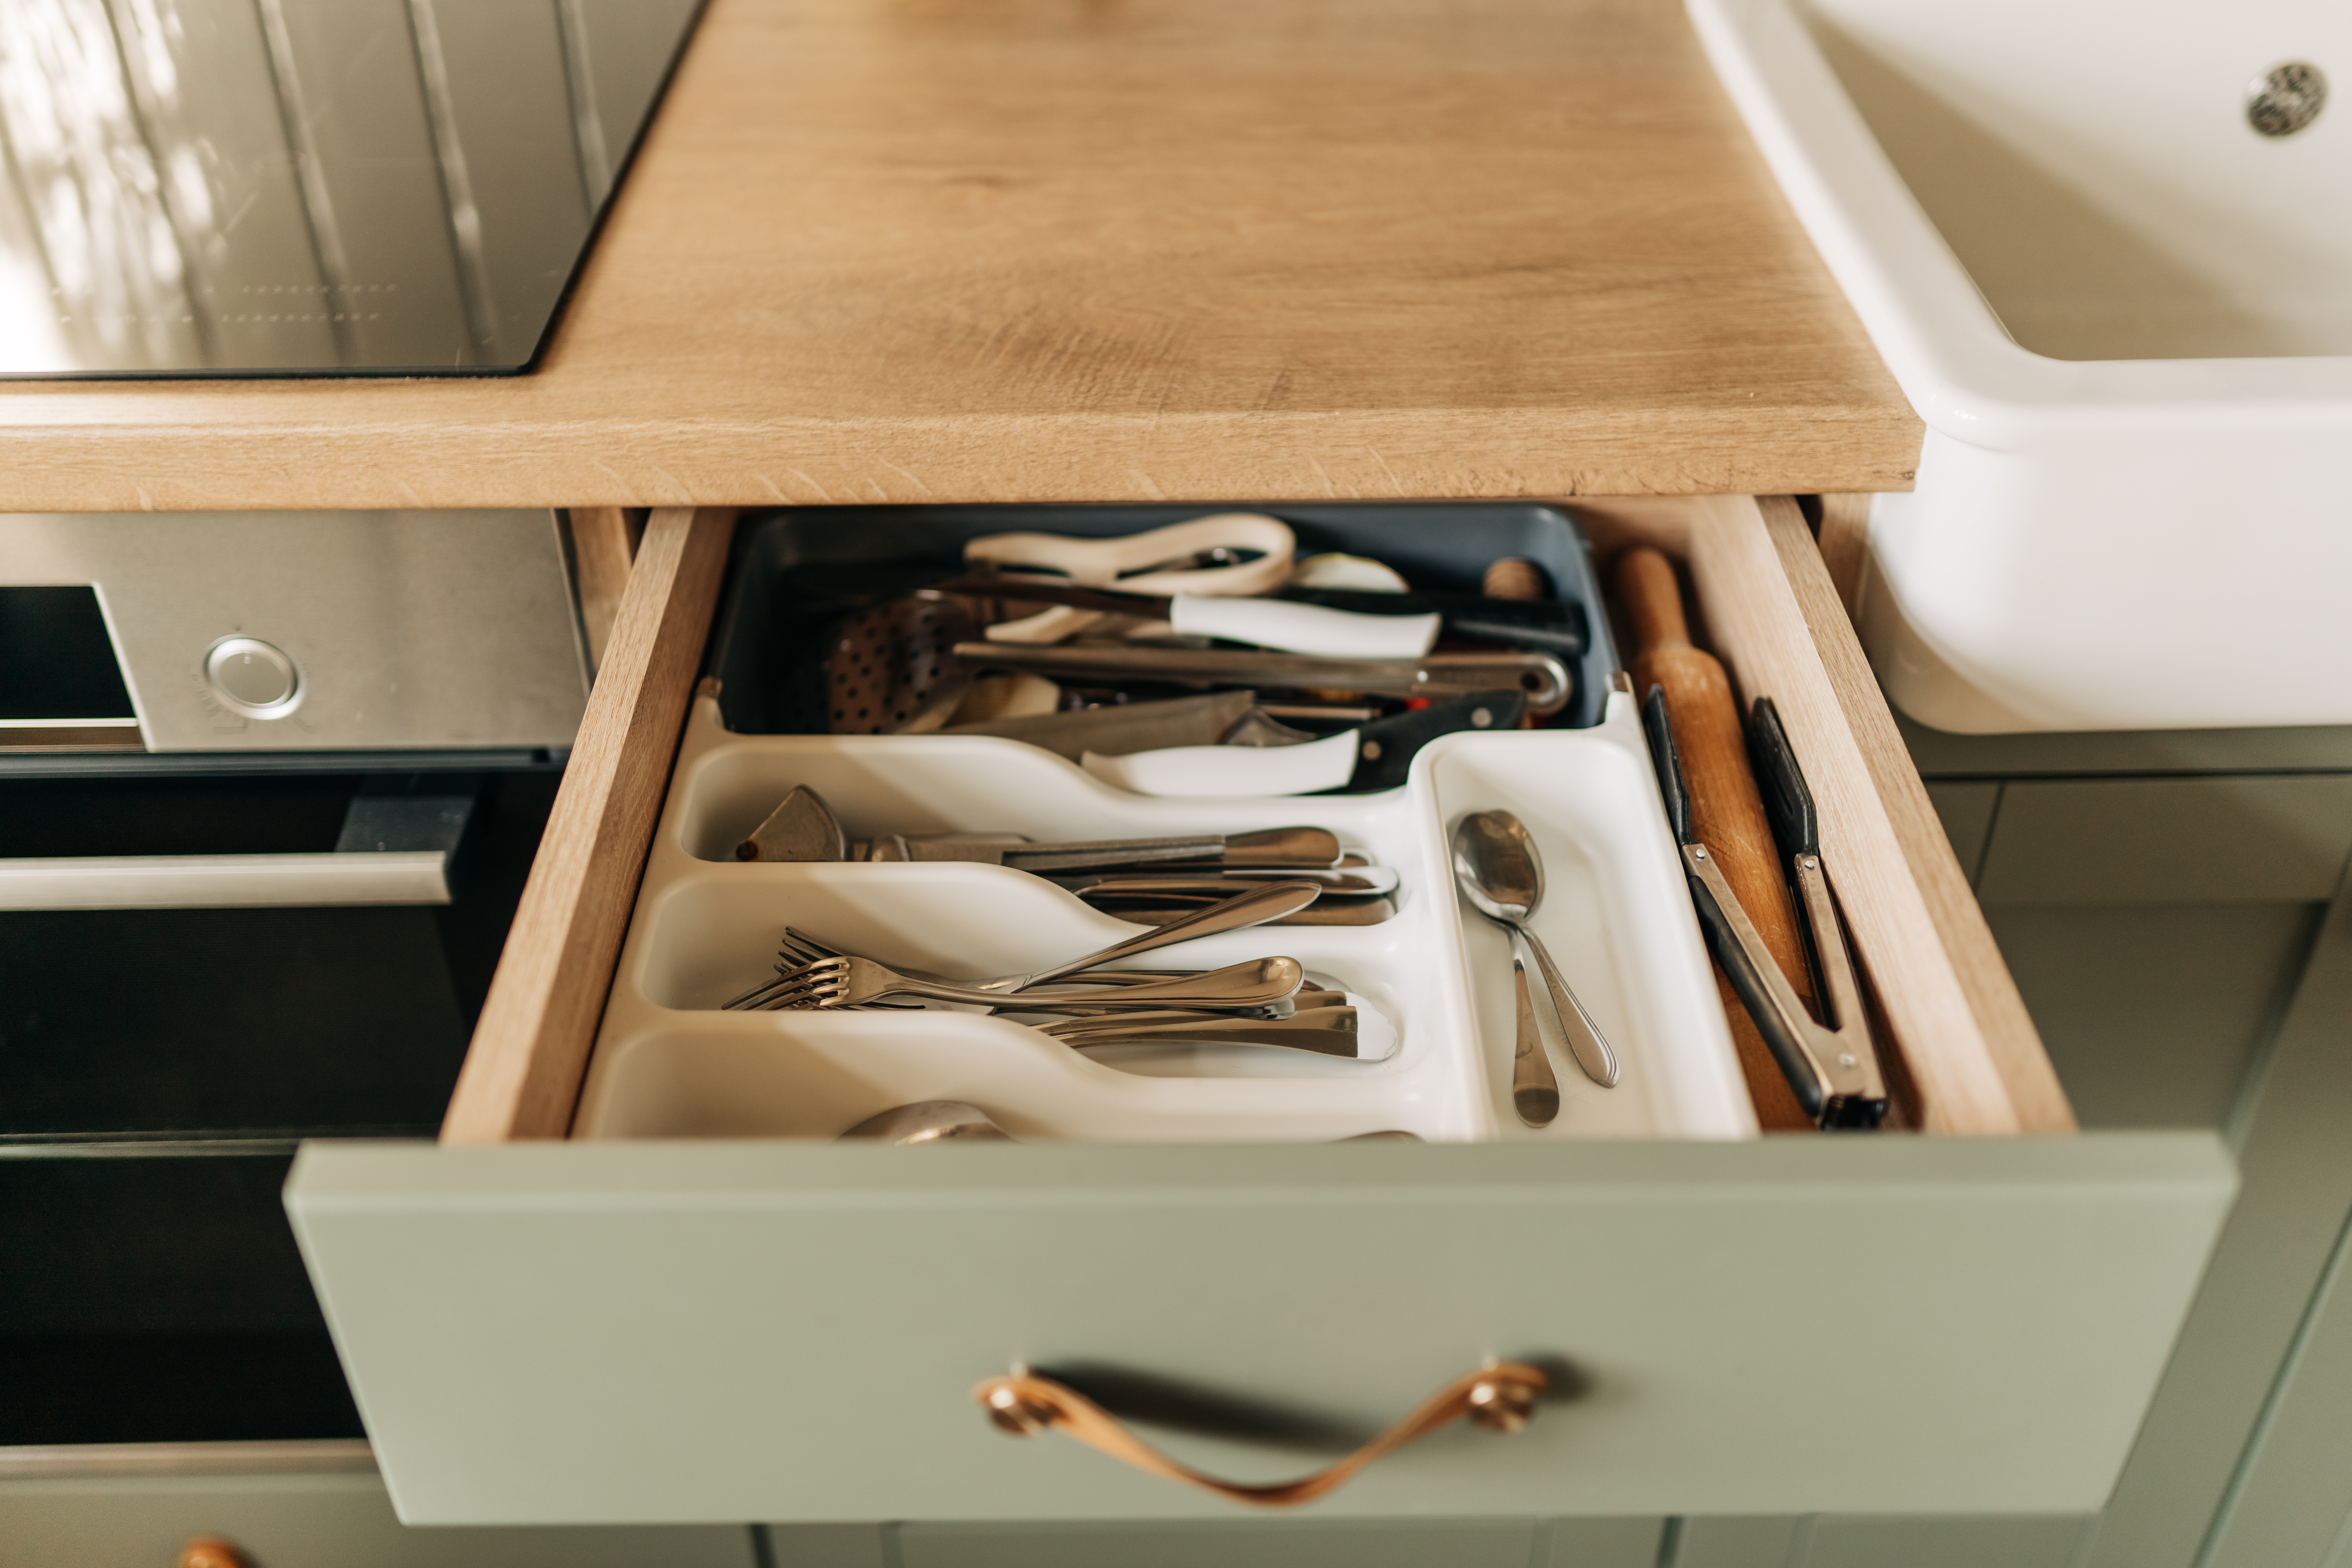 How to Fix a Kitchen Drawer Slide That Does Not Close All the Way